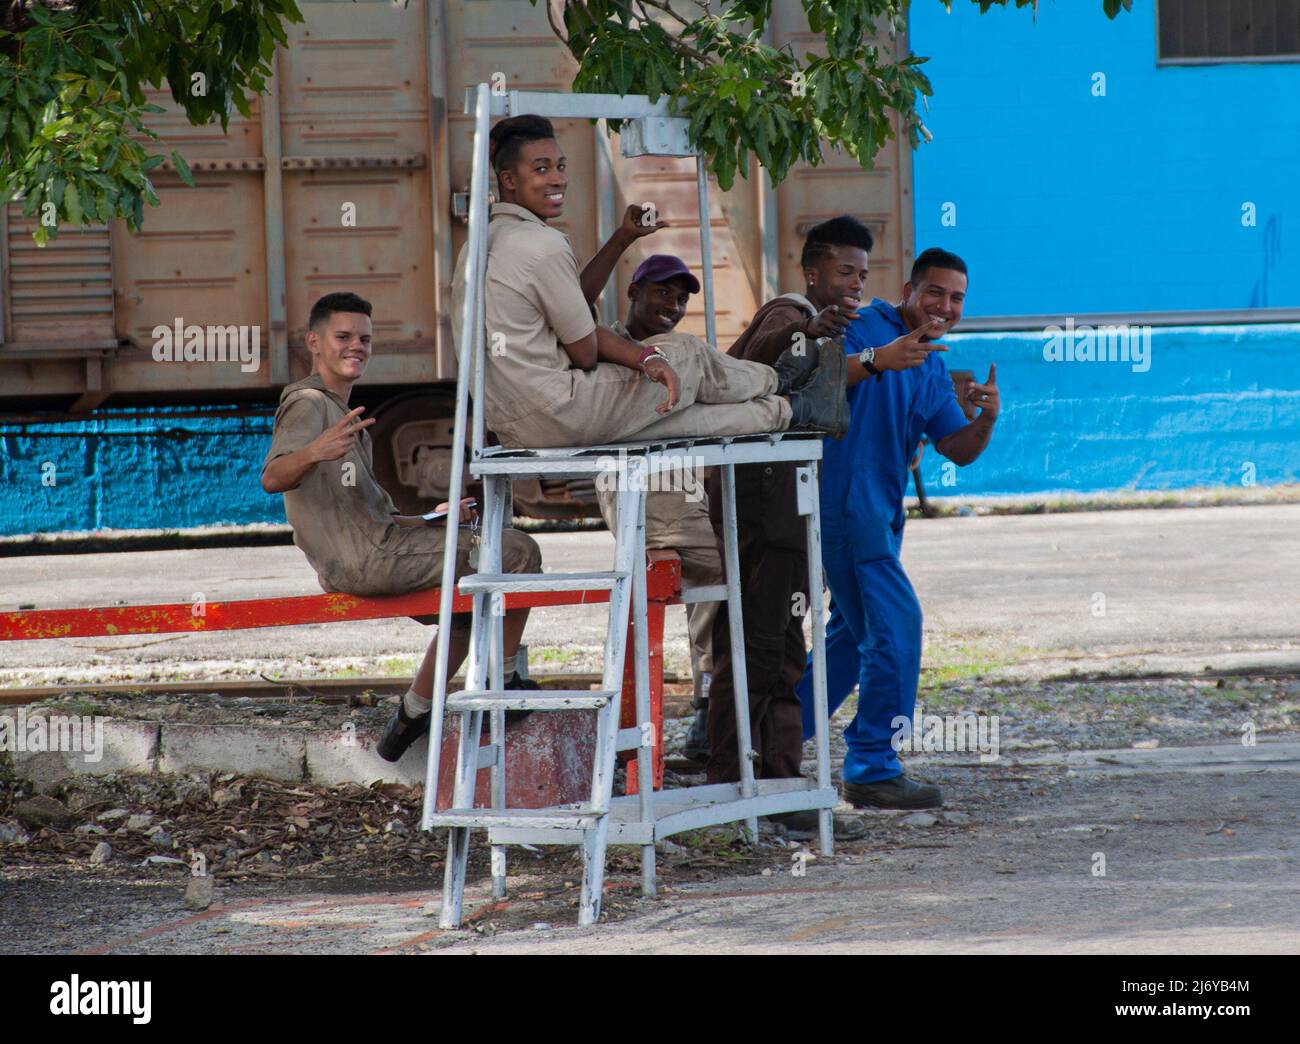 Young security office co-workers laugh together while taking a break working in Havana, Cuba. Stock Photo